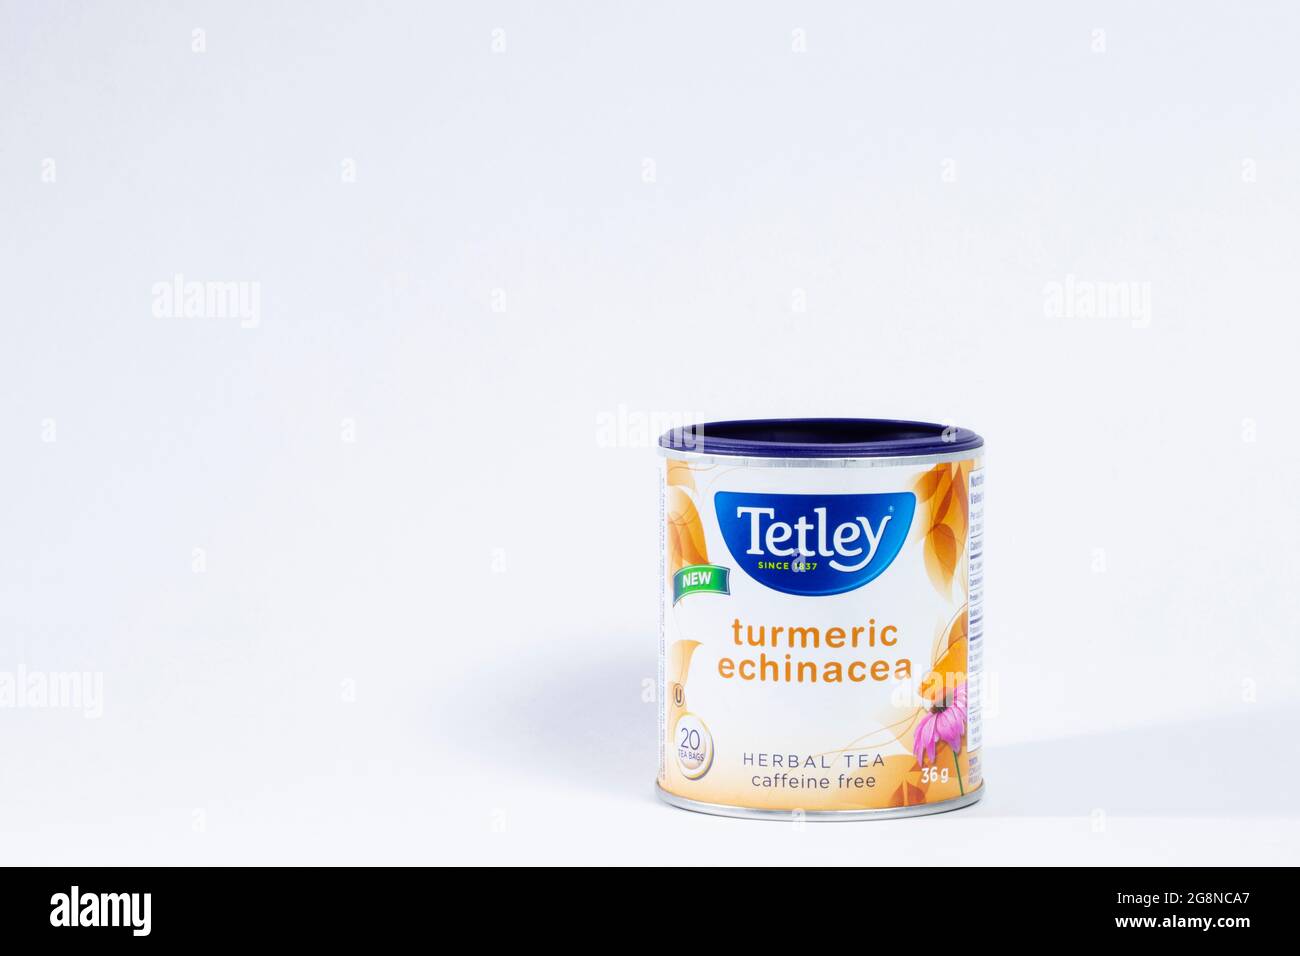 A container of natural herbal teabags made from turmeric and echinacea. Tetley is a major tea bag manufacturer. Stock Photo